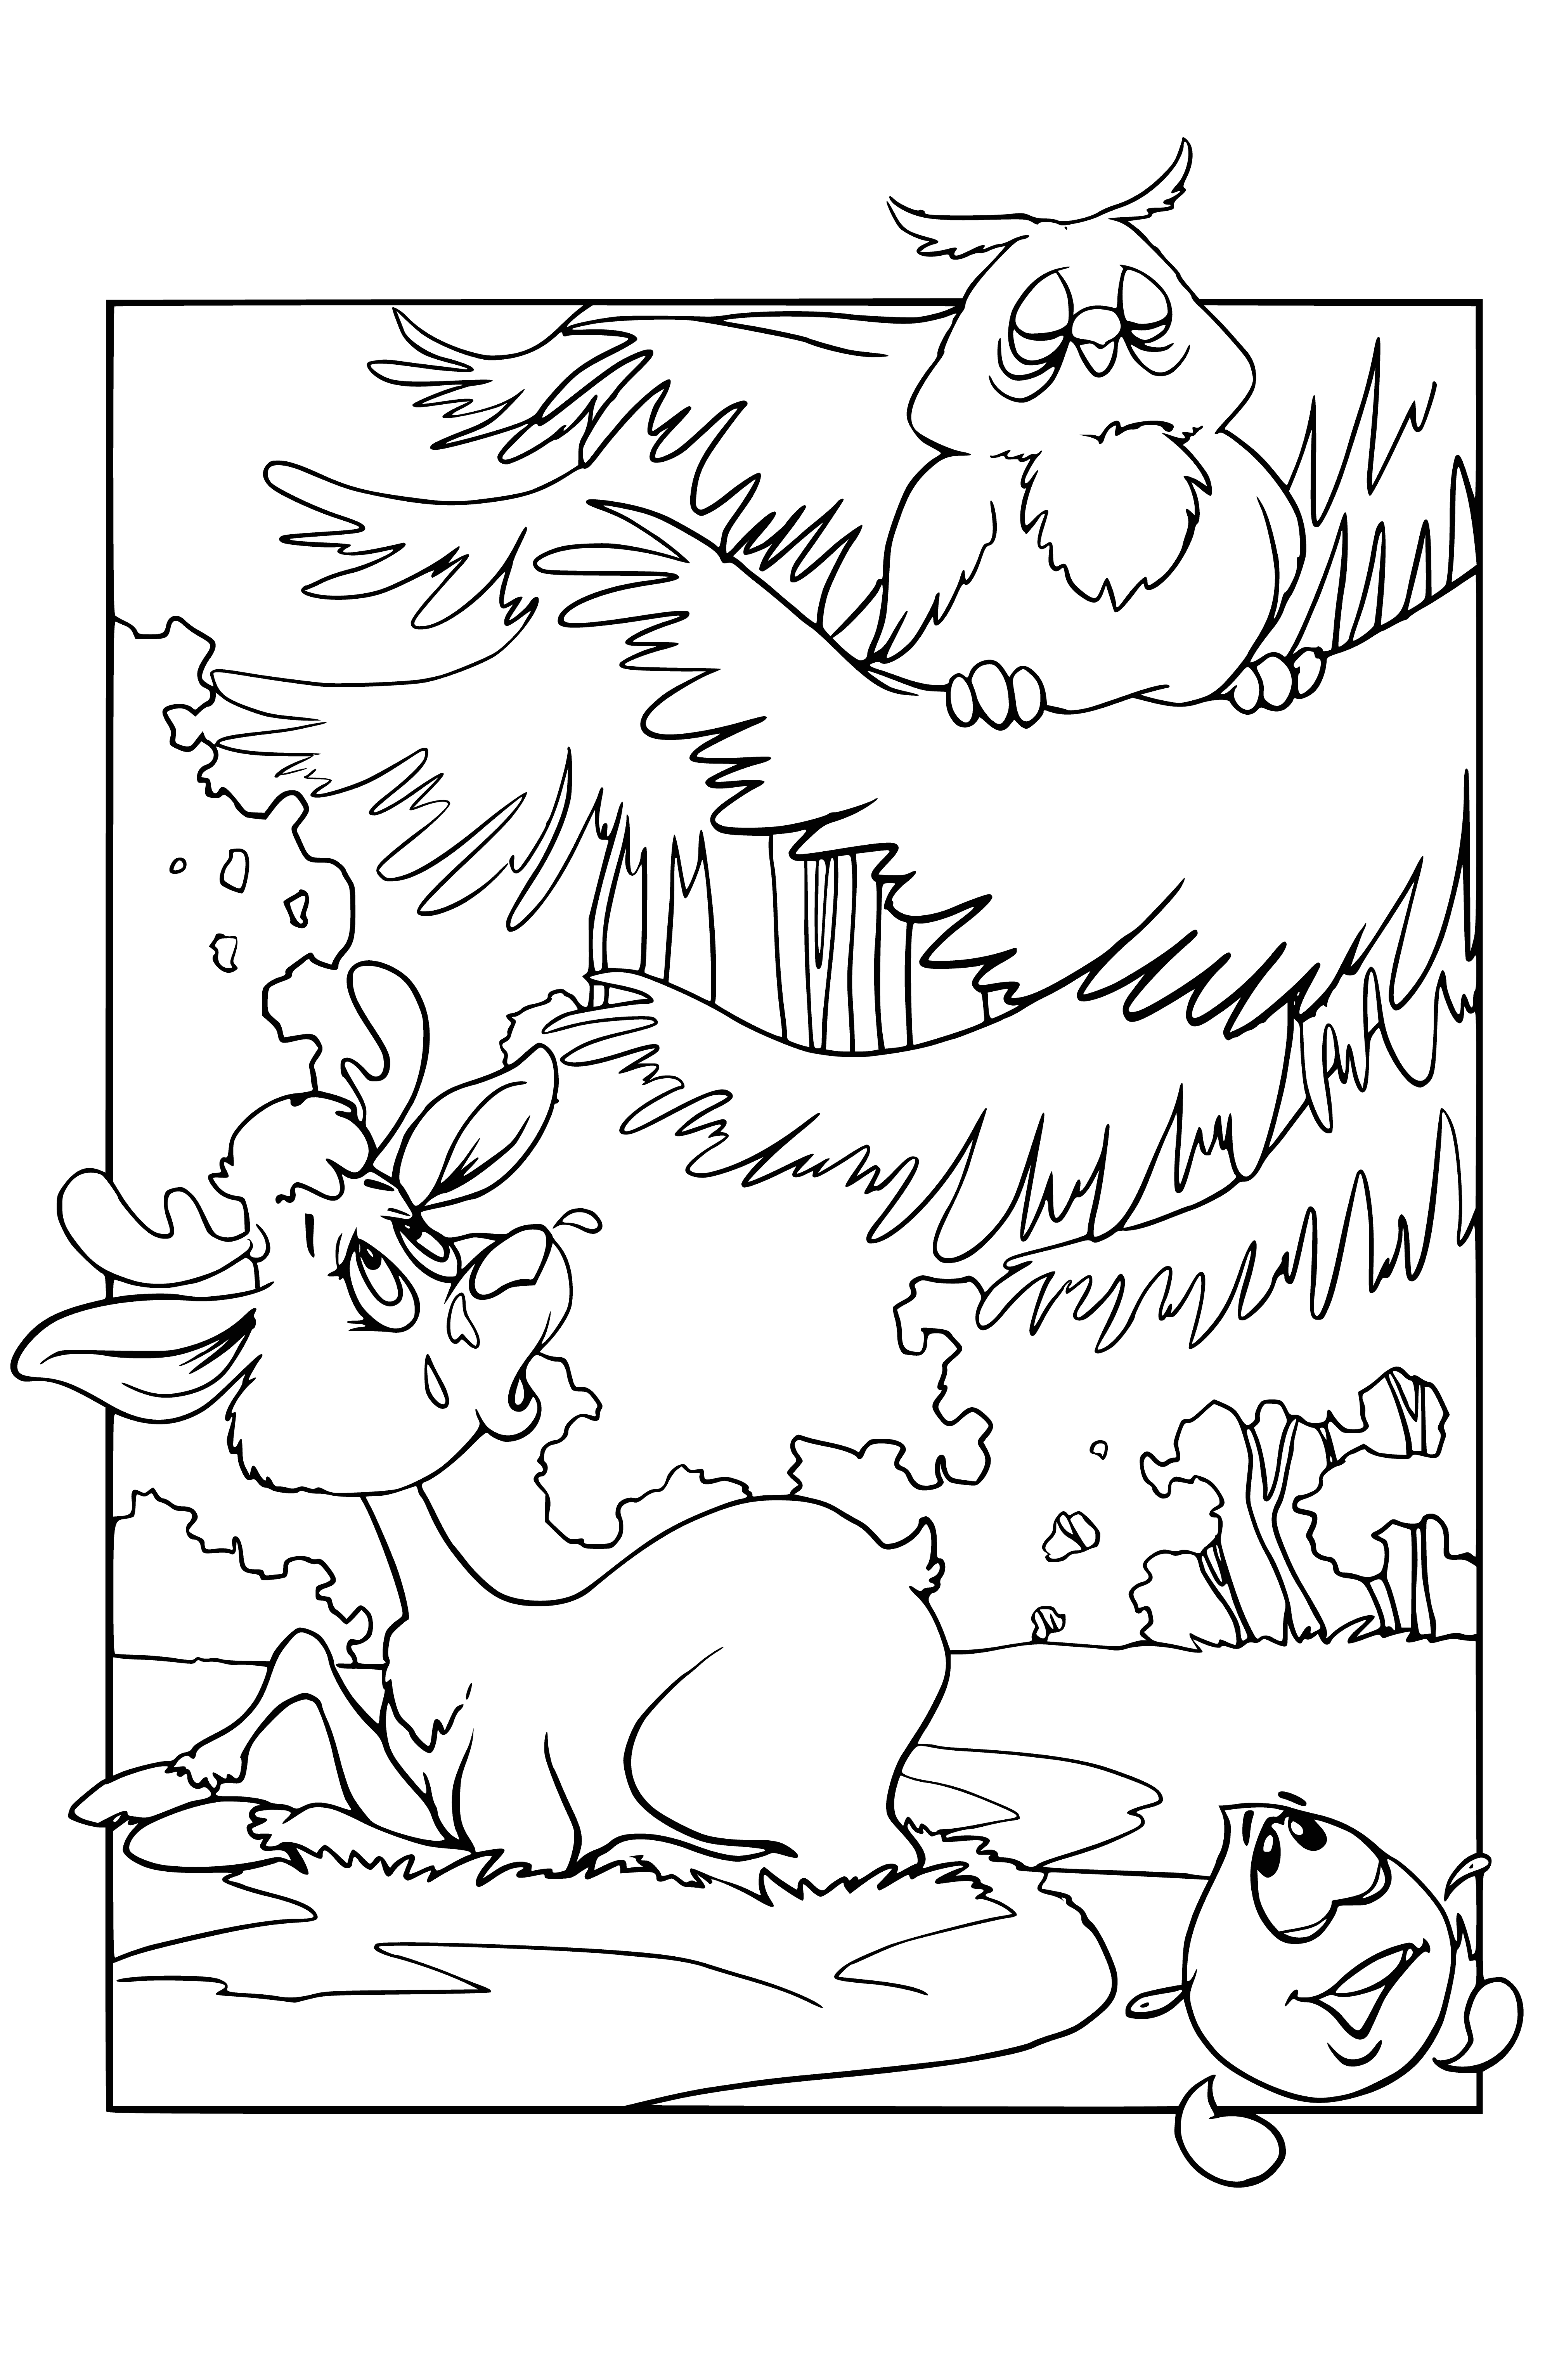 Droplet coloring page